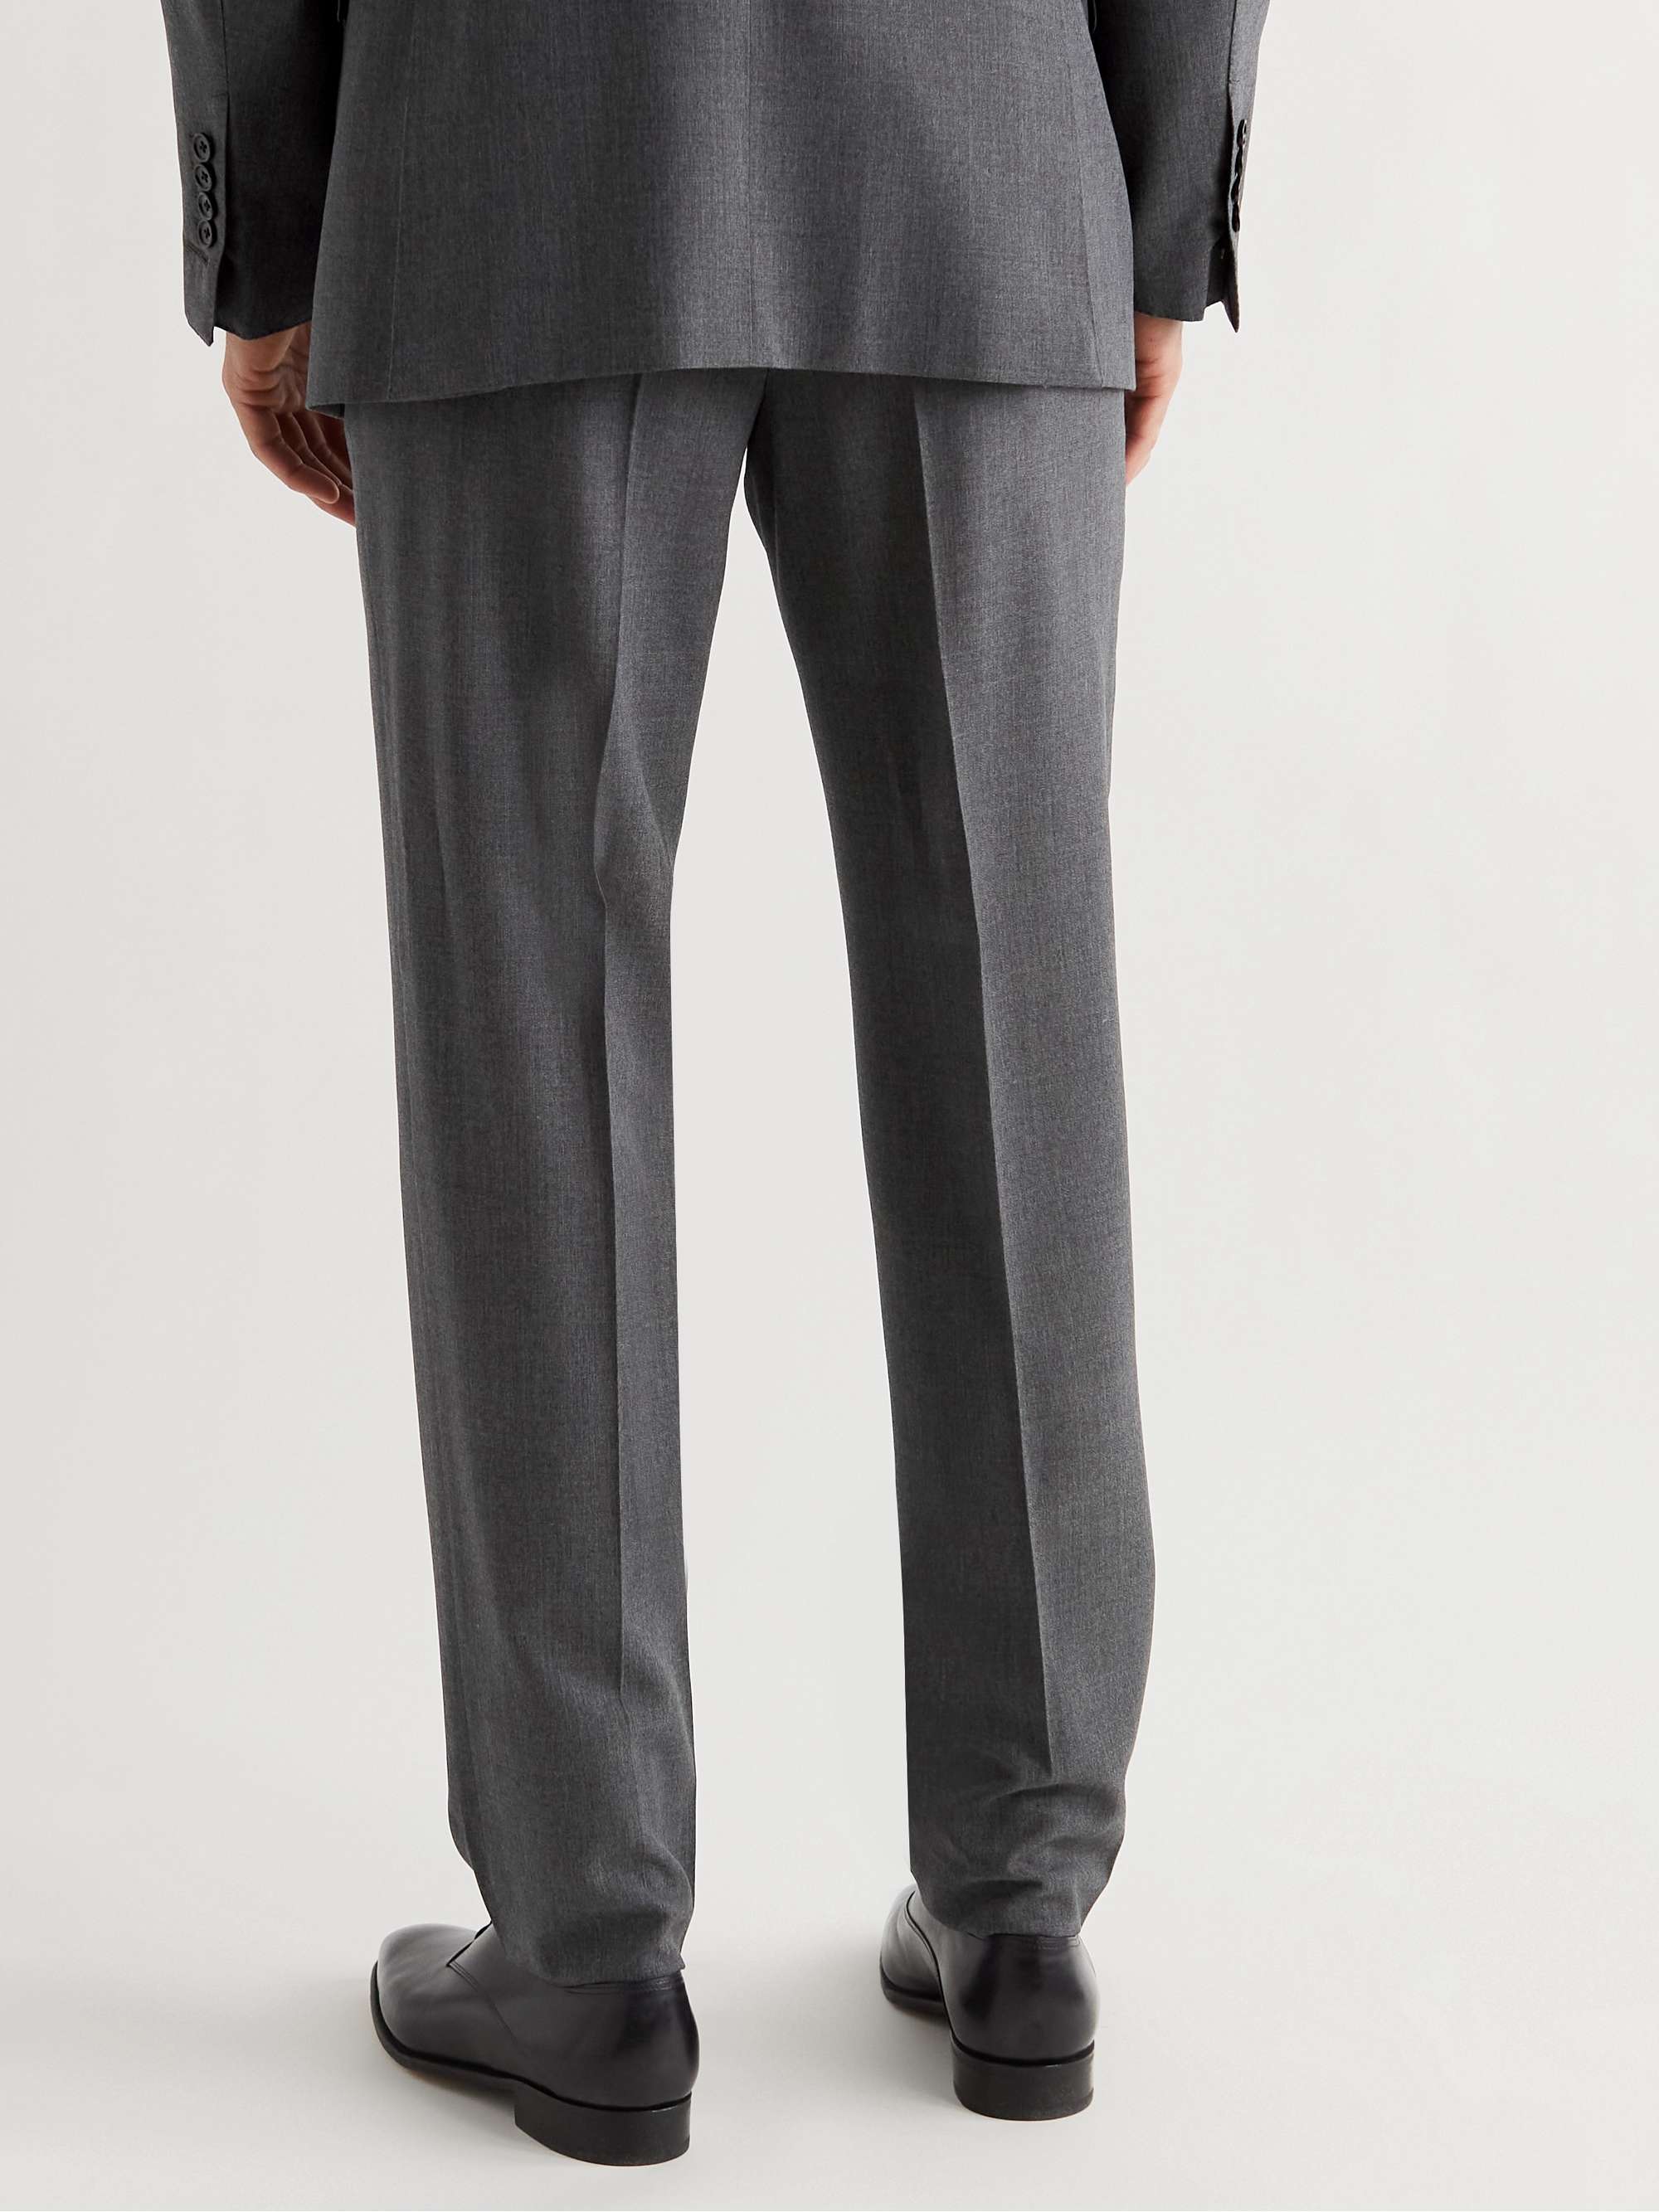 TOM FORD O'Connor Slim-Fit Wool Suit Trousers